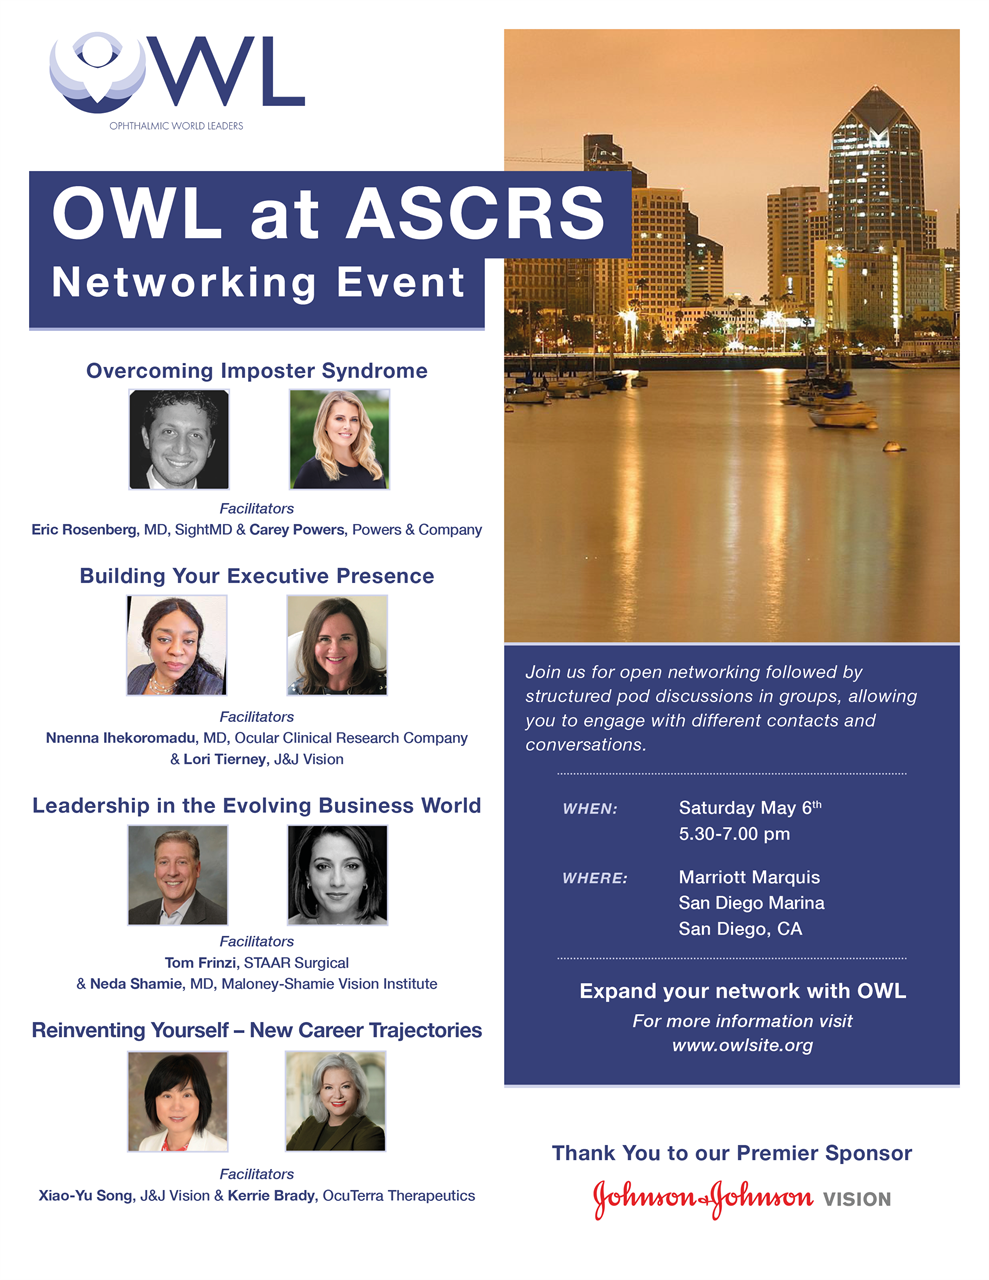 Expand your network with OWL! Register today for the OWL at ASCRS Networking Event on Saturday, May 6, 2023; 5:30 PM-7 PM. Location: Marriott Marquis San Diego Marina; 333 West Harbor Drive, San Diego, CA 92101 (Grand Ballroom). Special thanks to our Premier Sponsor for this event: Johnson & Johnson Vision. Pod Discussions: Overcoming Imposter Syndrome; Building Your Executive Presence; Leadership In The Evolving Business World; Reinventing Yourself-New Career Trajectories